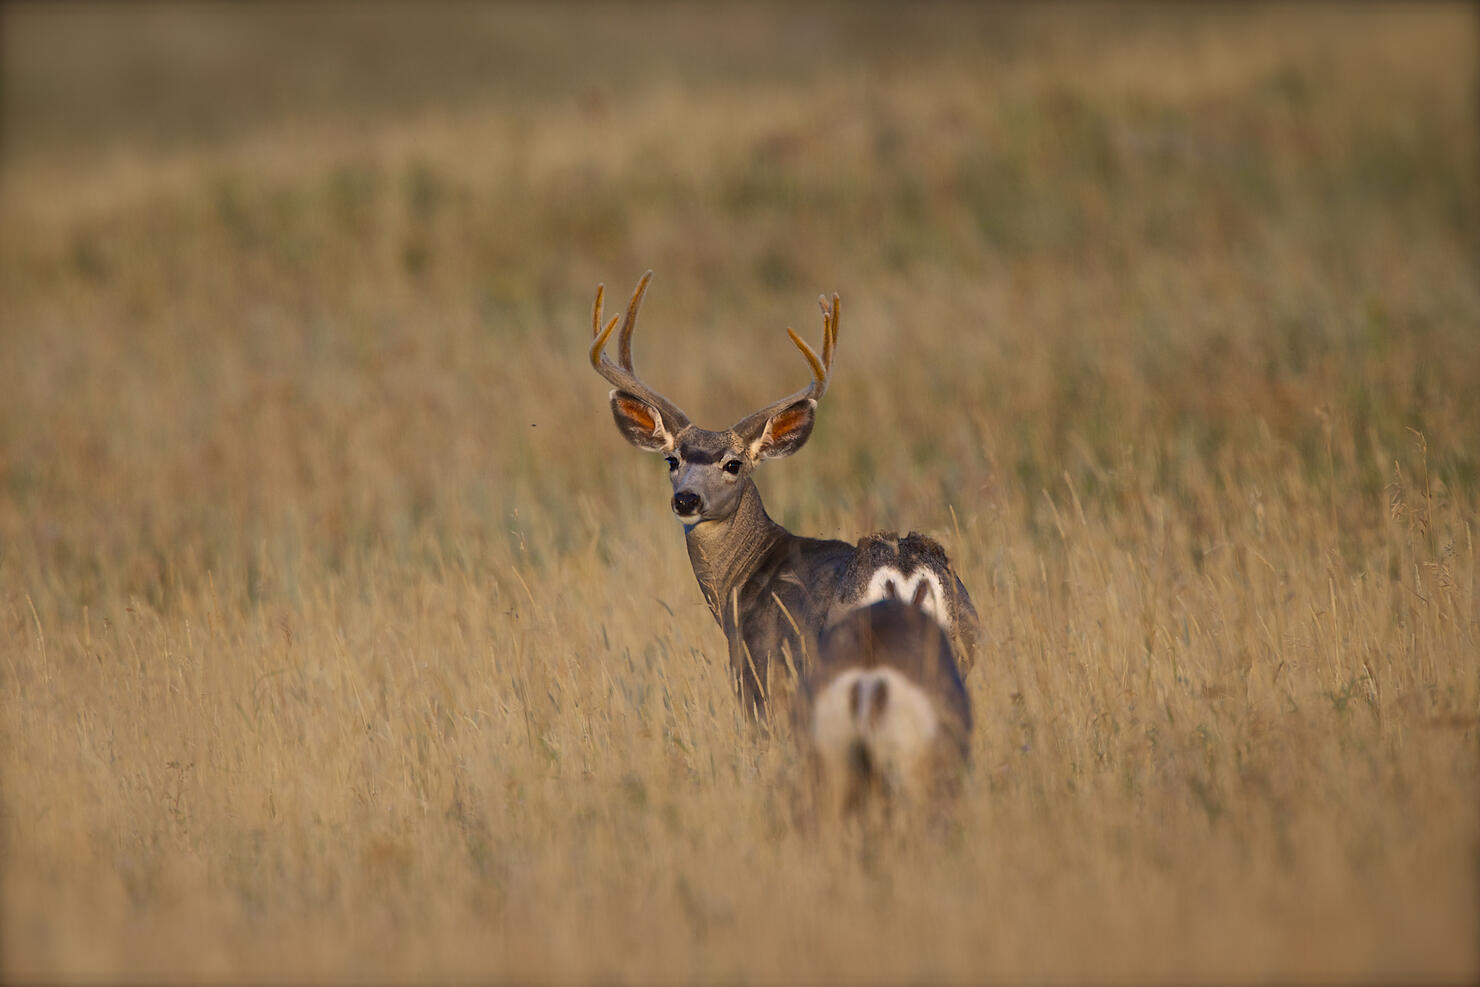 Portrait of deer in grassland, Yellowstone National Park, USA